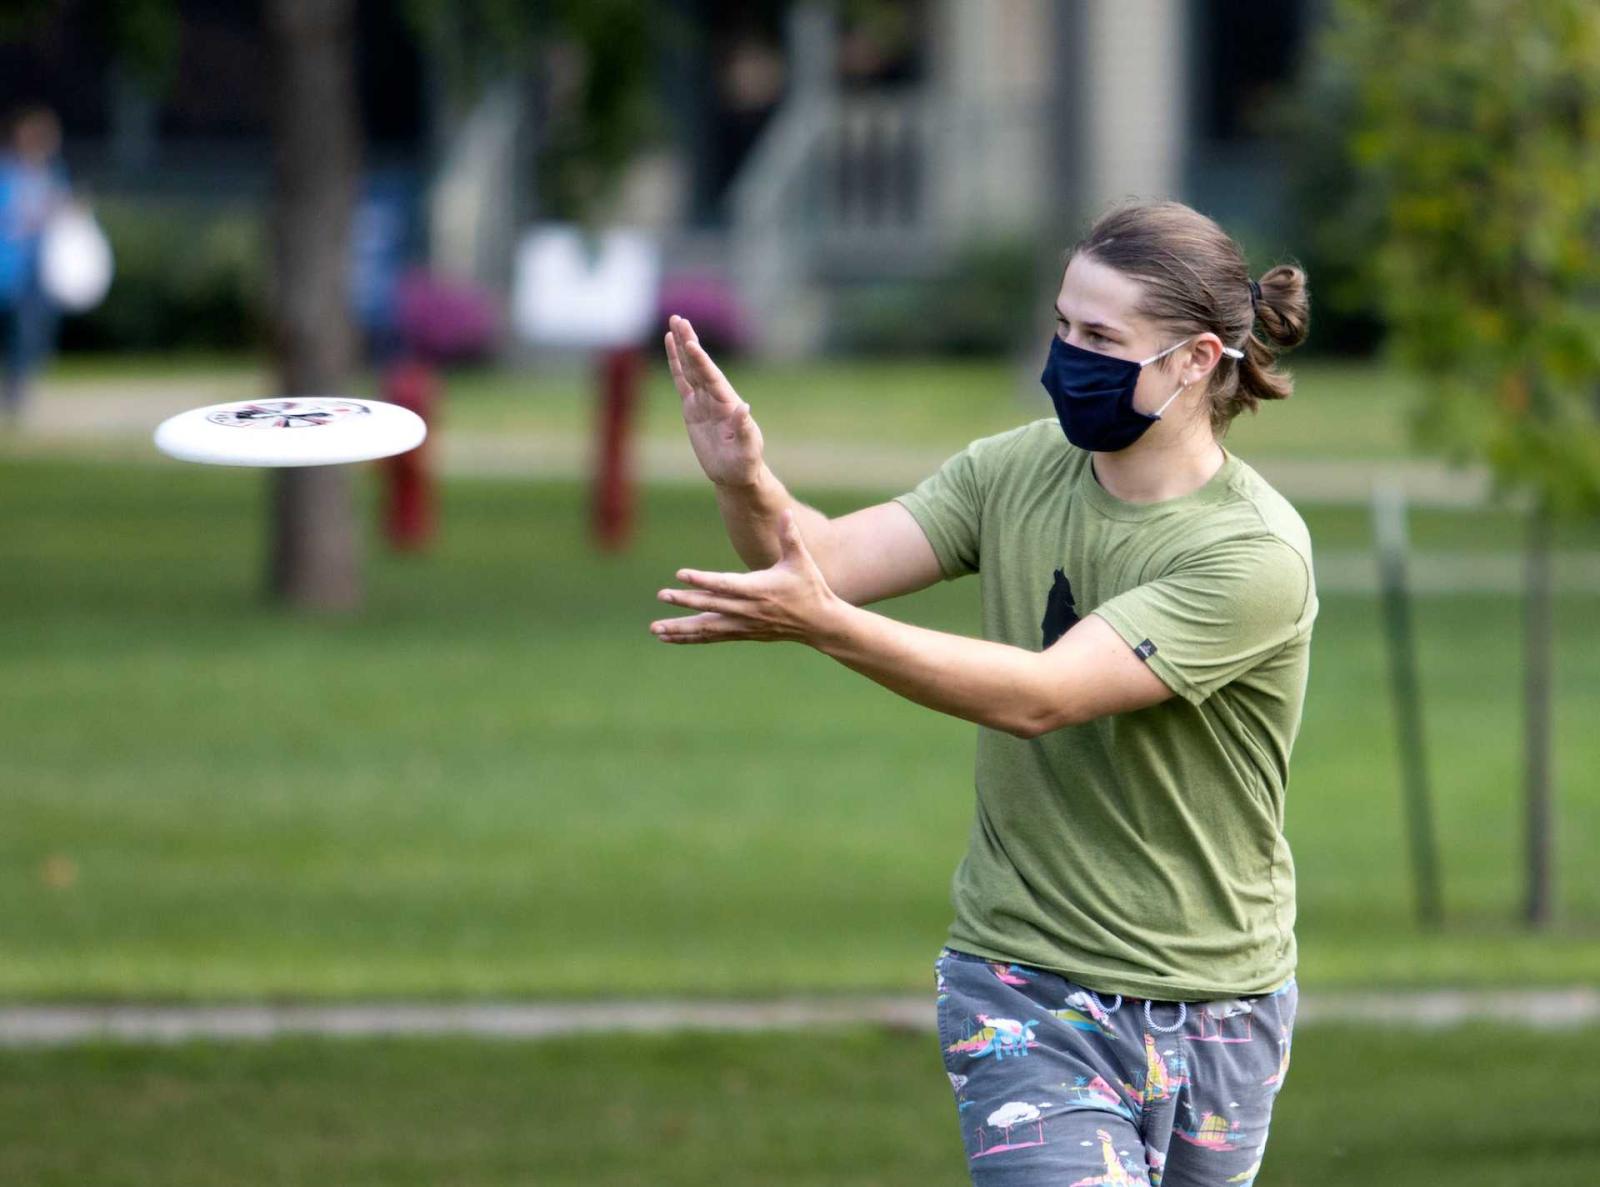 Student in mask reaching arms out to catch incoming frisbee on Main Hall Green.